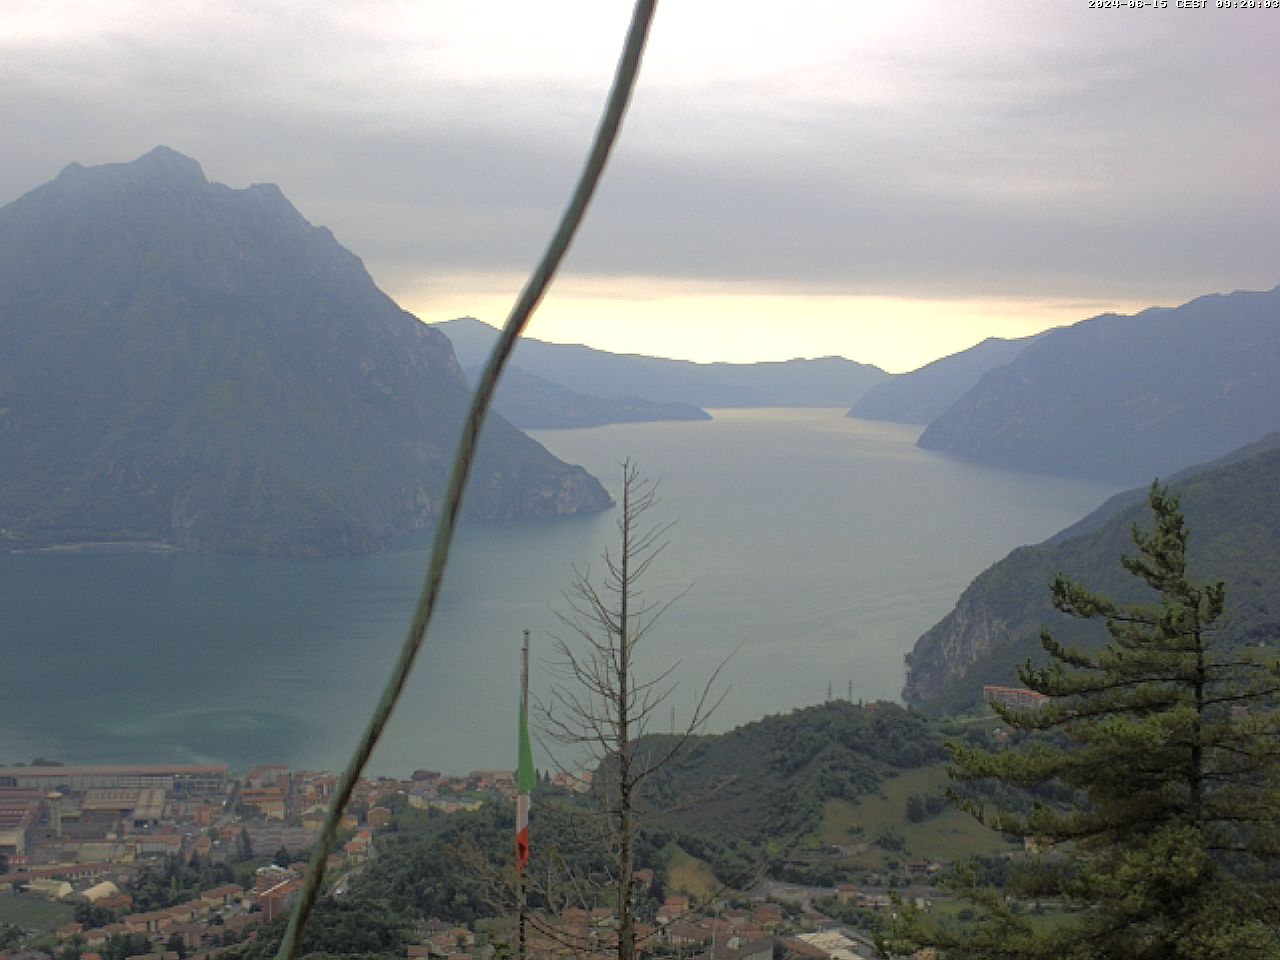 Lovere (Lac d'Iseo) Me. 09:29